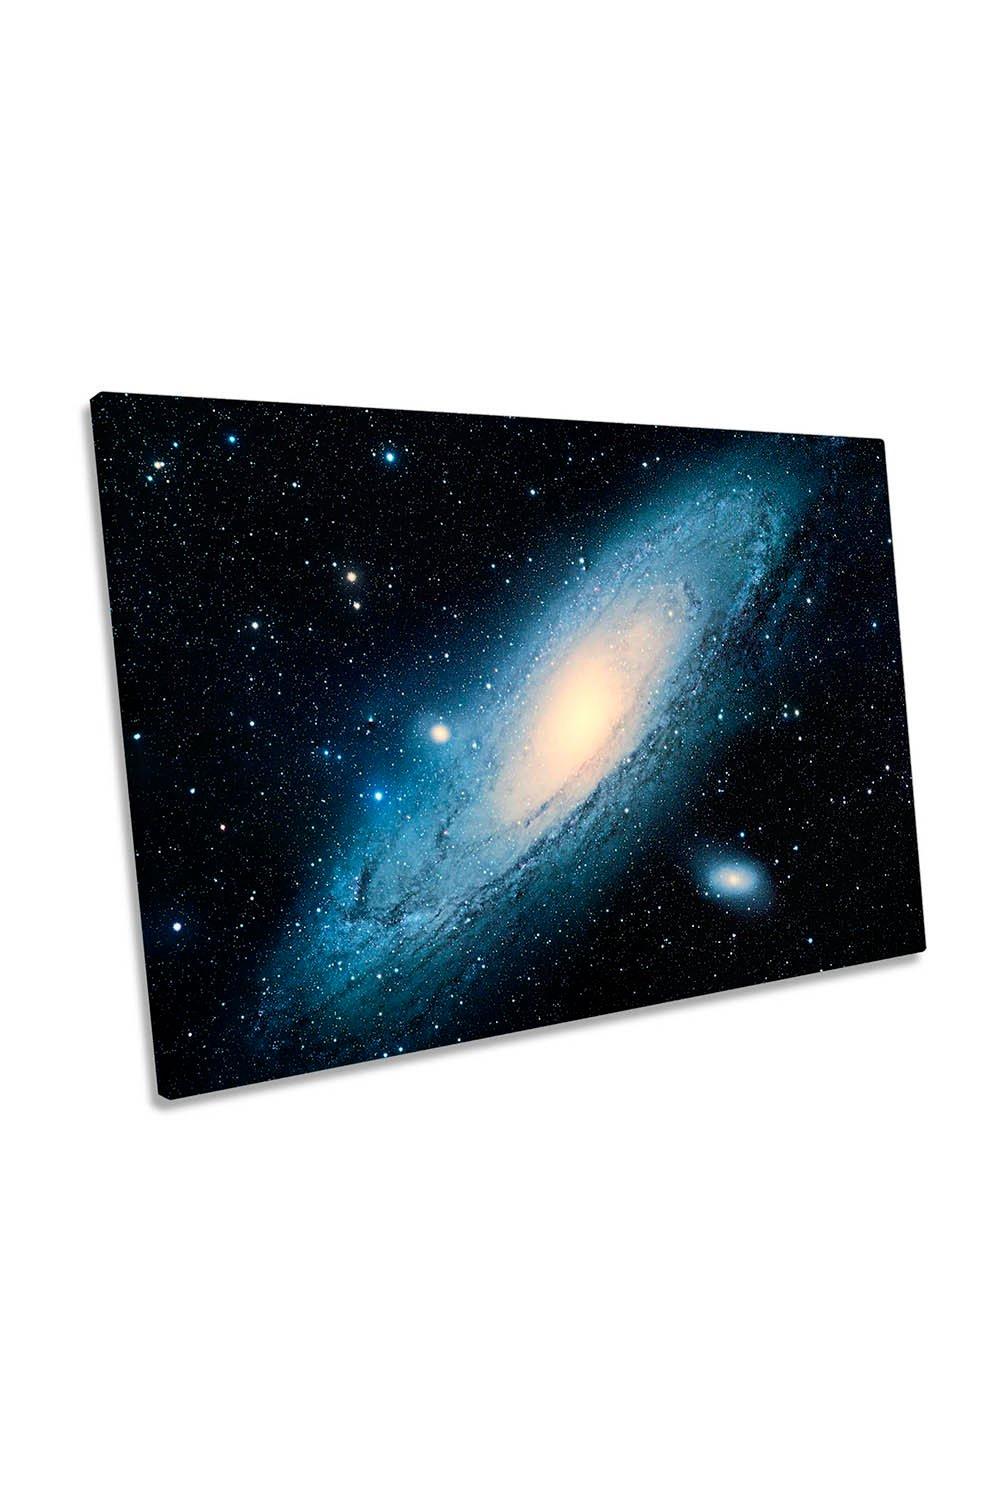 Andromeda Galaxy Outer Space Canvas Wall Art Picture Print